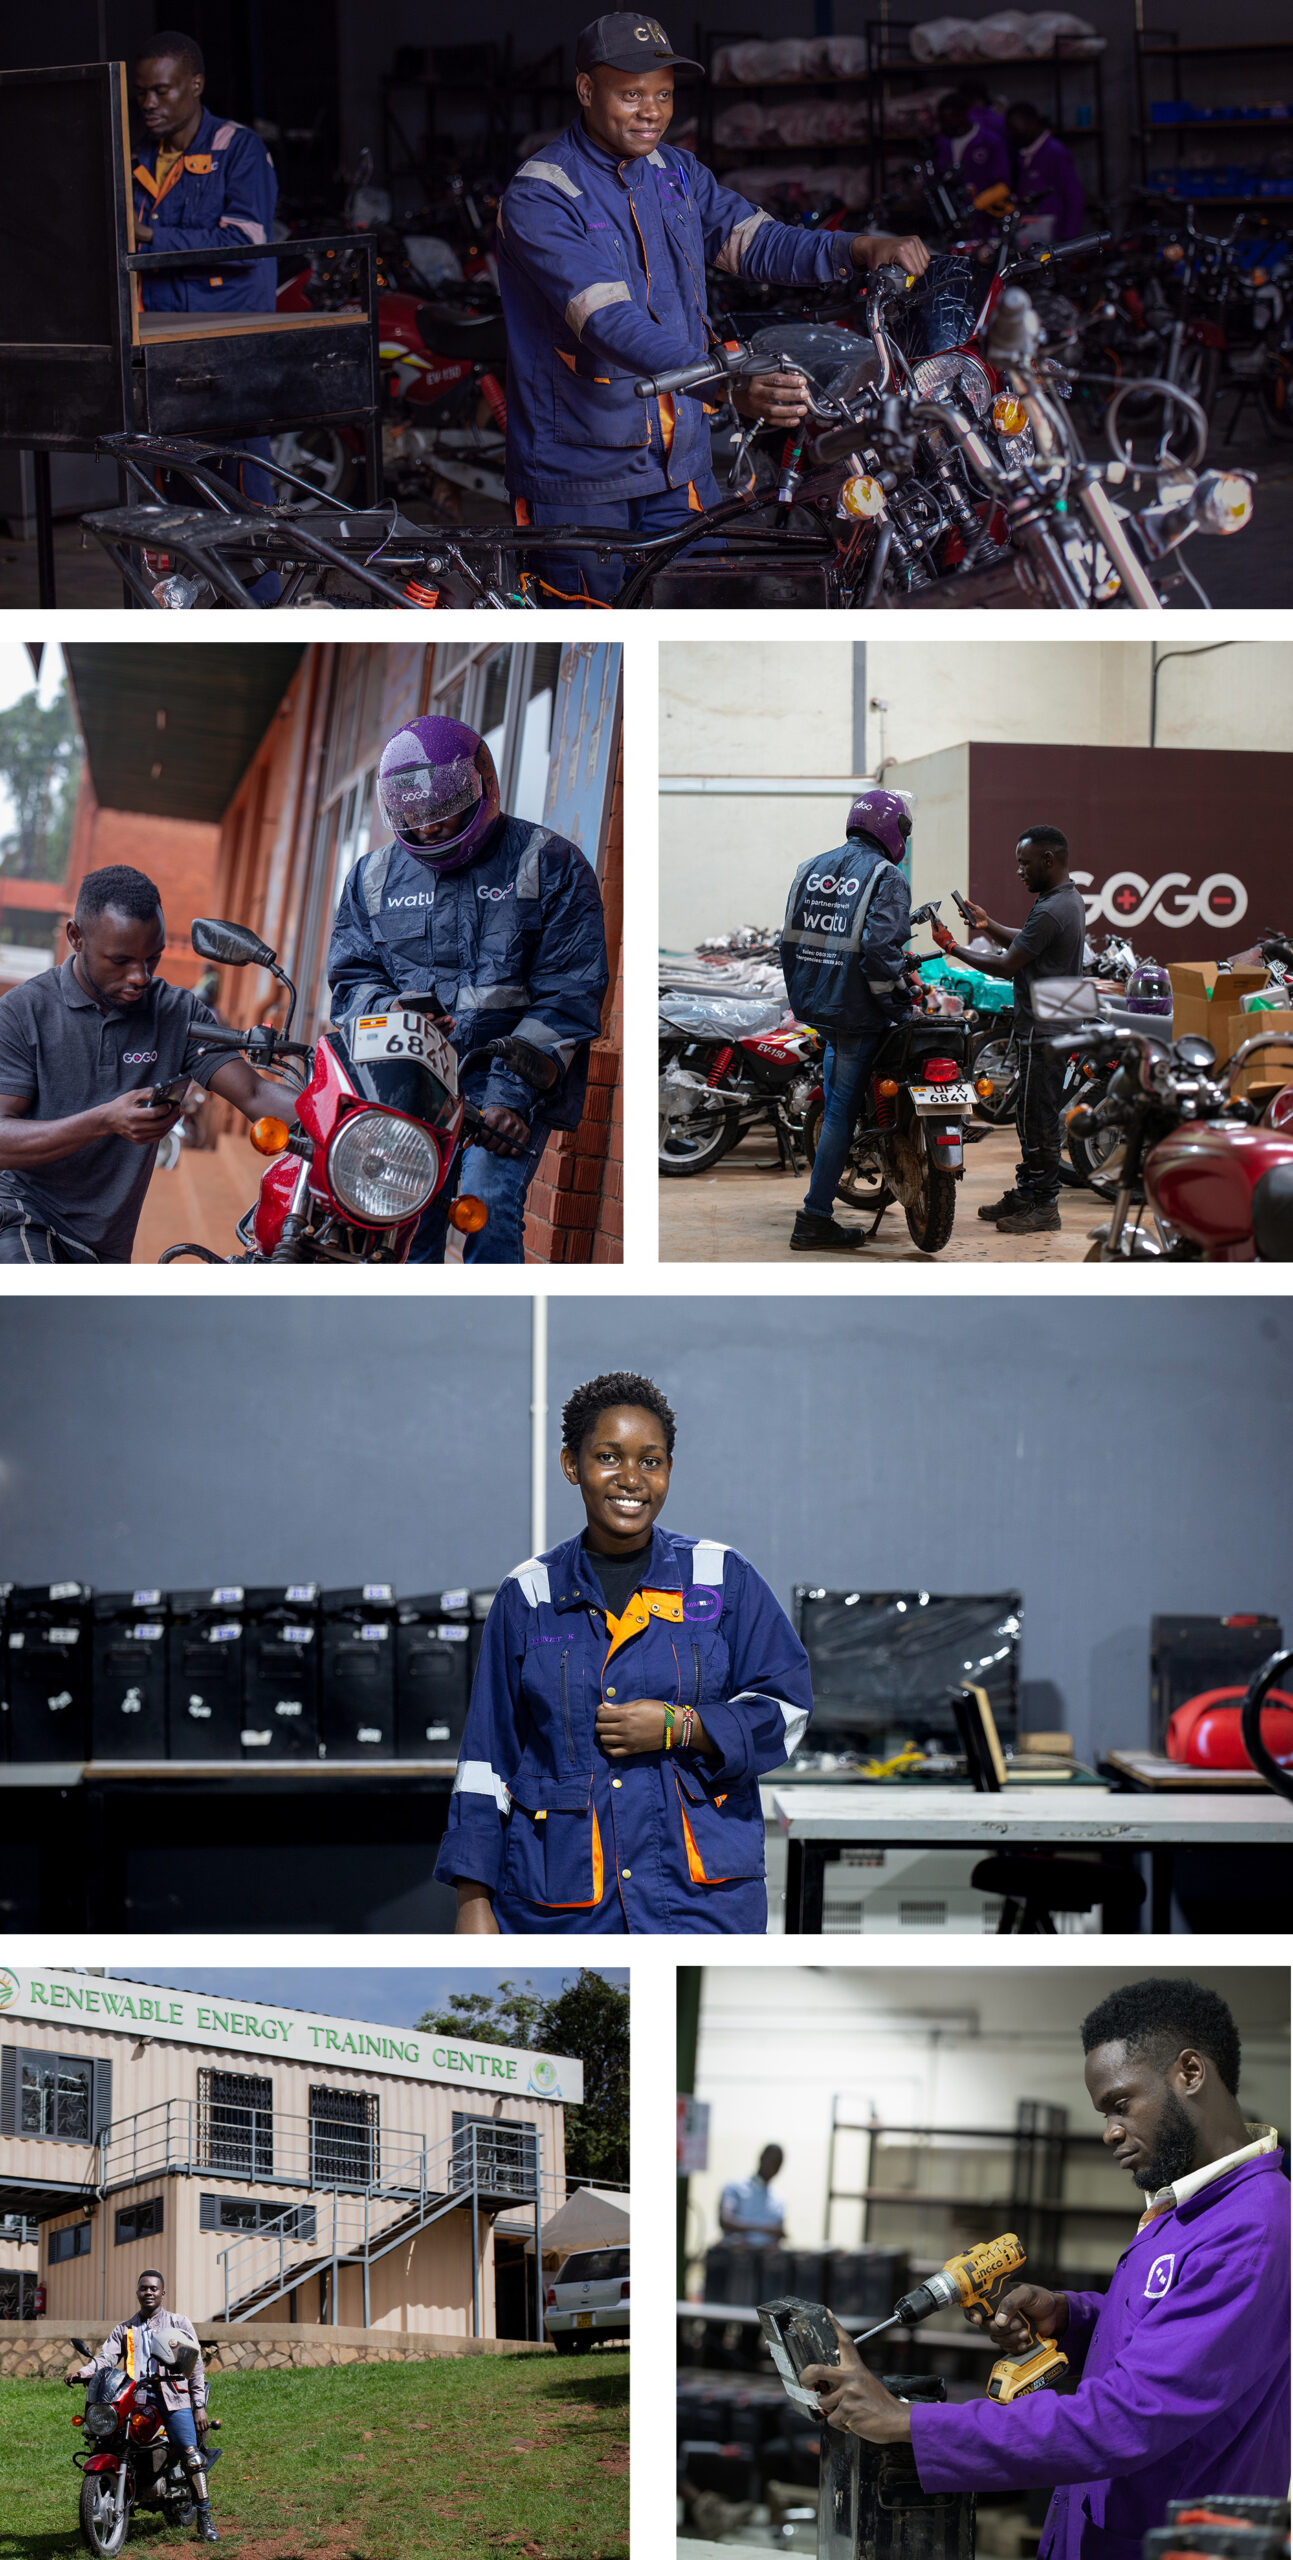 Collection of photos of the 2024 Ashden Award winner GoGo Electric. Starting at the top a man is holding an electric bike. Below on the left-hand side are two men working on a motorcycle. On the right-hand side is a GoGo electric driving swapping a battery. Below is a woman smiling at the camera. Below on the left-hand side is a man sitting on his electric bike outside a building. On the right-hand side is a worker maintaining a battery with a drill.